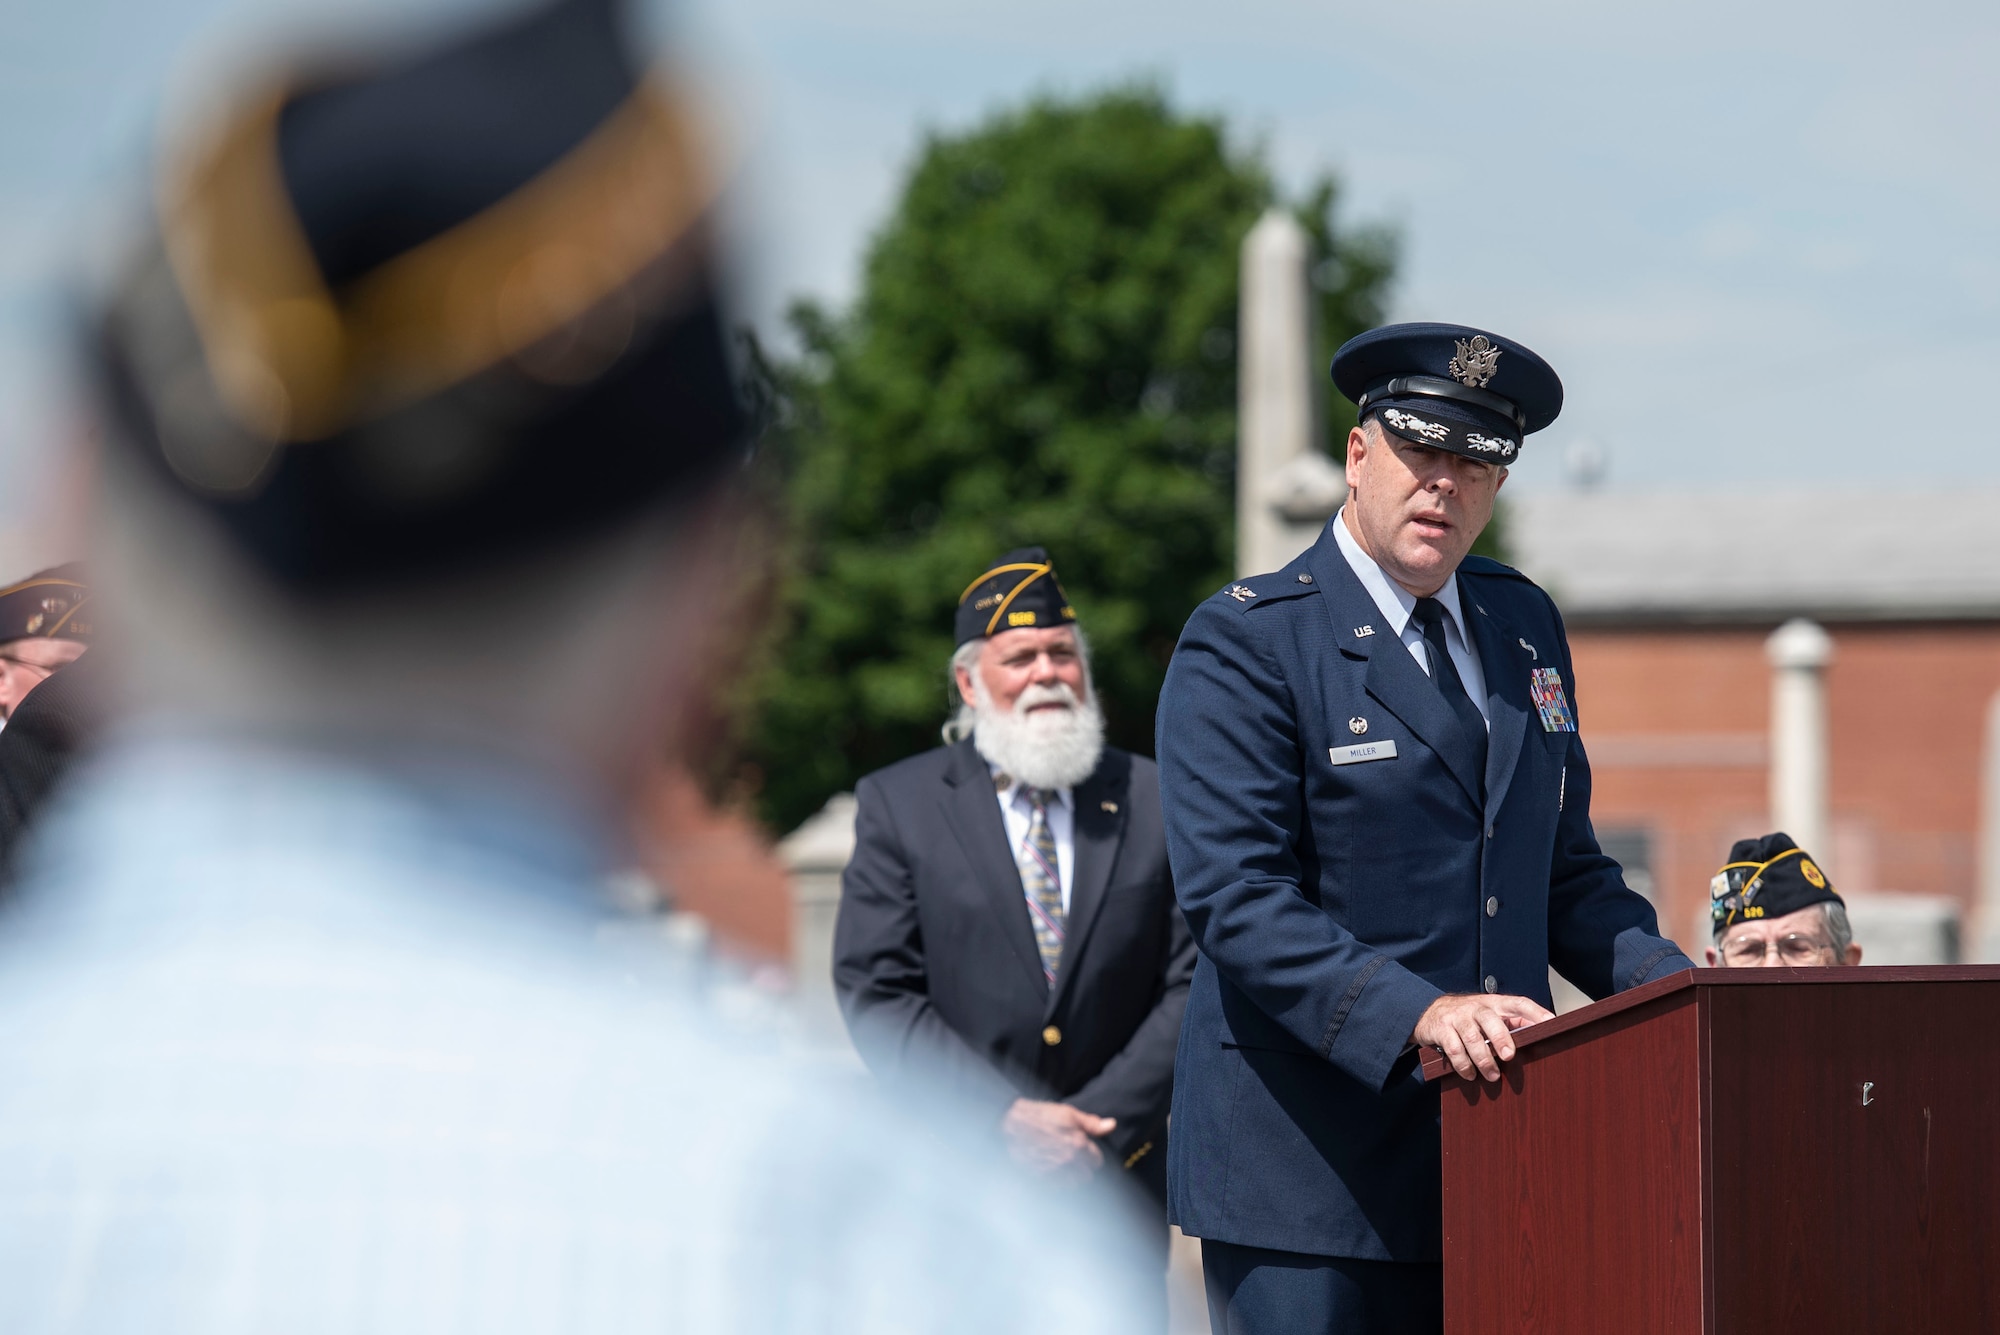 U.S. Air Force Col. Patrick Miller, 88th Air Base Wing and Wright-Patterson Air Force Base, Ohio, installation commander, delivers remarks as the keynote speaker during a Memorial Day ceremony in Fairborn, Ohio, May 31, 2021. Established in 1971, Memorial Day is an official federal holiday meant to allow people to honor the men and women who have died while on duty with the U.S. Military. (U.S. Air Force photo by Wesley Farnsworth)